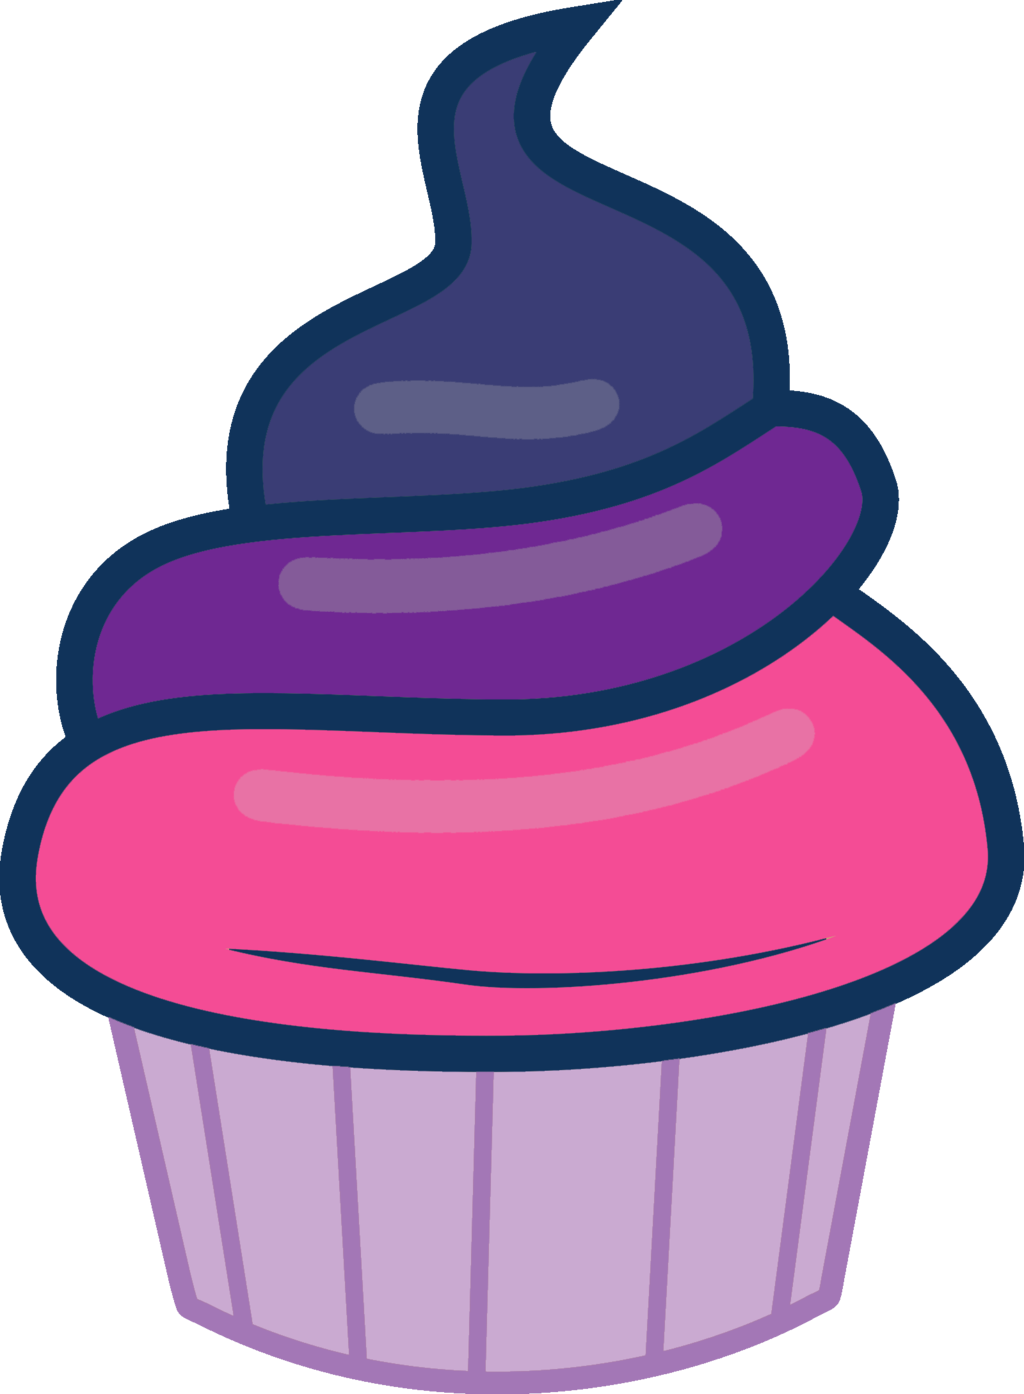 Twilight sparkle cupcake by. Muffins clipart mlp